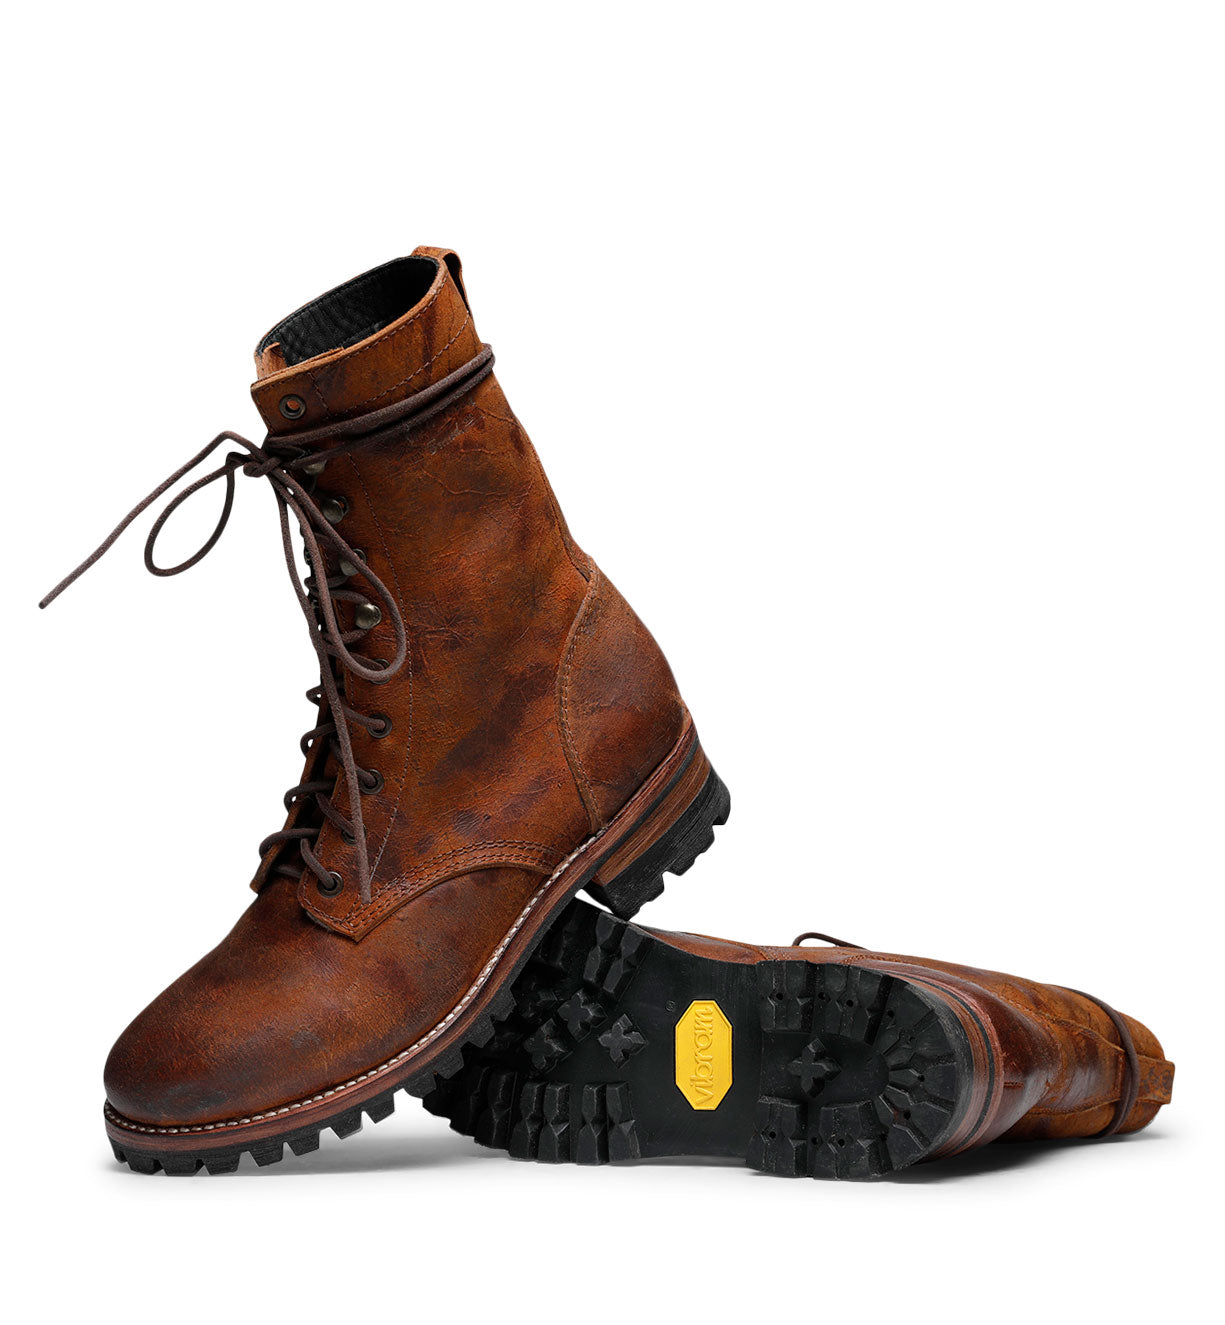 Pair of Santa Rosa Brand Jackson Boots with a goodyear welt against a white background.